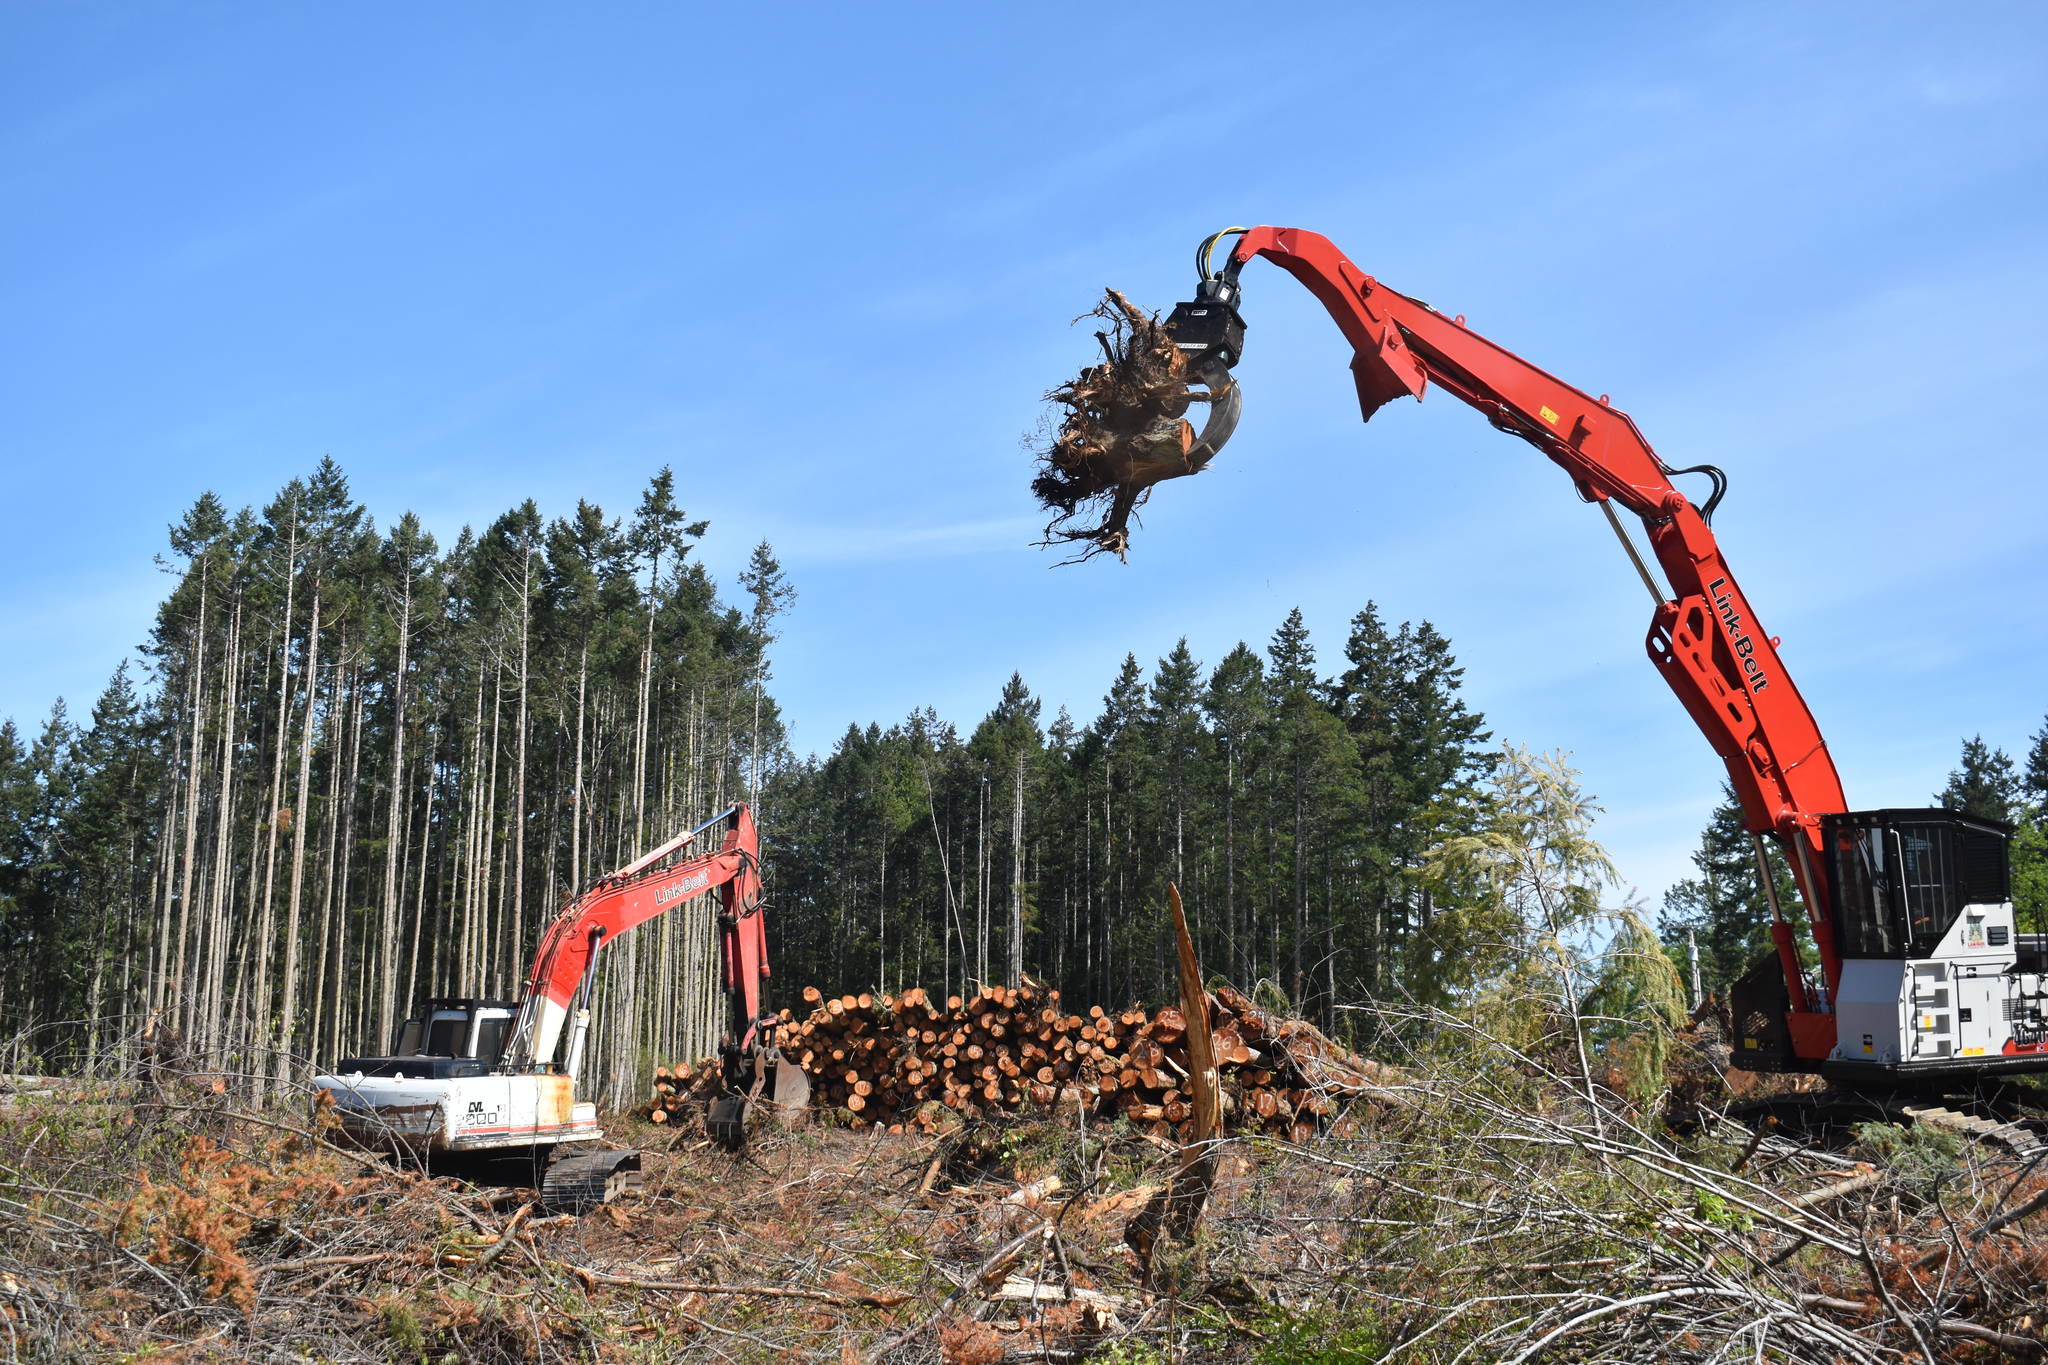 Photo by Emily Gilbert/Whidbey News-Times
Roughly half of the trees on Cherry Valley Logging's 40-acre property on North Whidbey will go to a Skagit County fish habitat project, owner Justin Vanhulle. The other half will be sent to a mill.